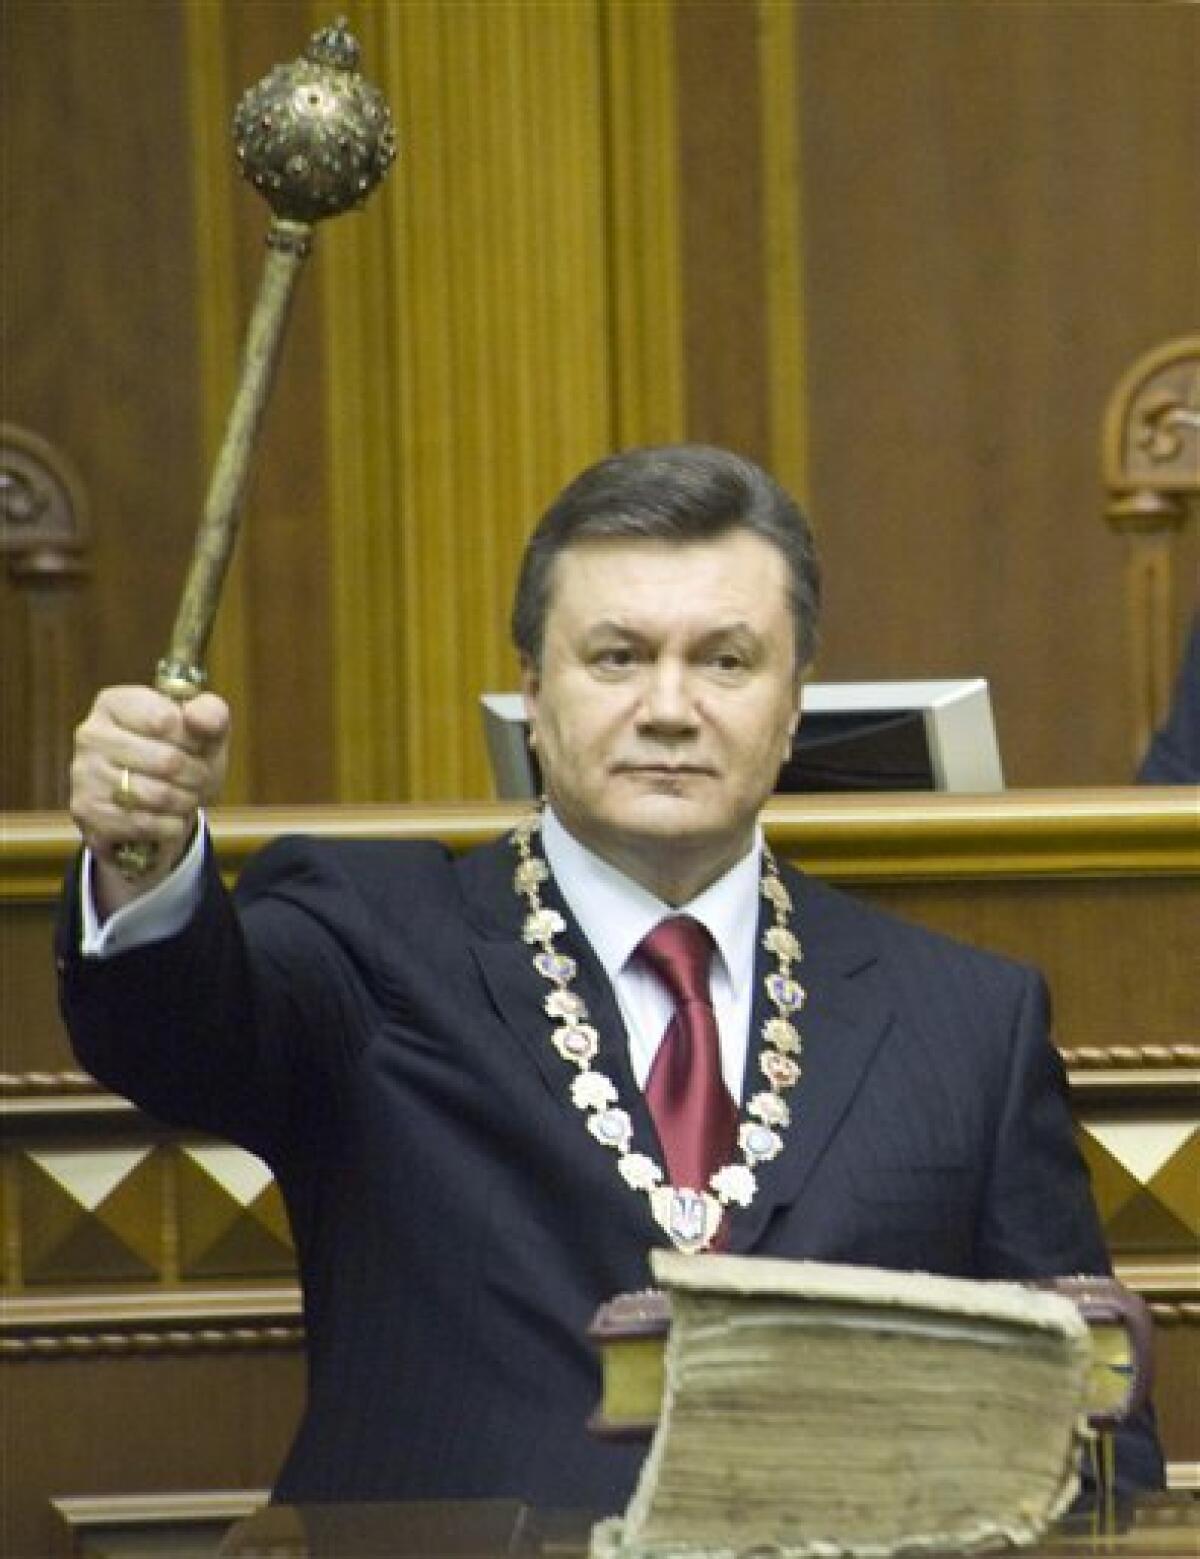 Ukraine's President Viktor Yanukovych holds a Bulava, a historical symbol of power, after he taking oath in the parliament in Kiev, Ukraine, Thursday, Feb. 25, 2010. Viktor Yanukovych has been inaugurated as Ukraine's President, five years after his first bid failed amid massive protests over vote fraud. (AP Photo/Anastasia Sirotkina, Pool)